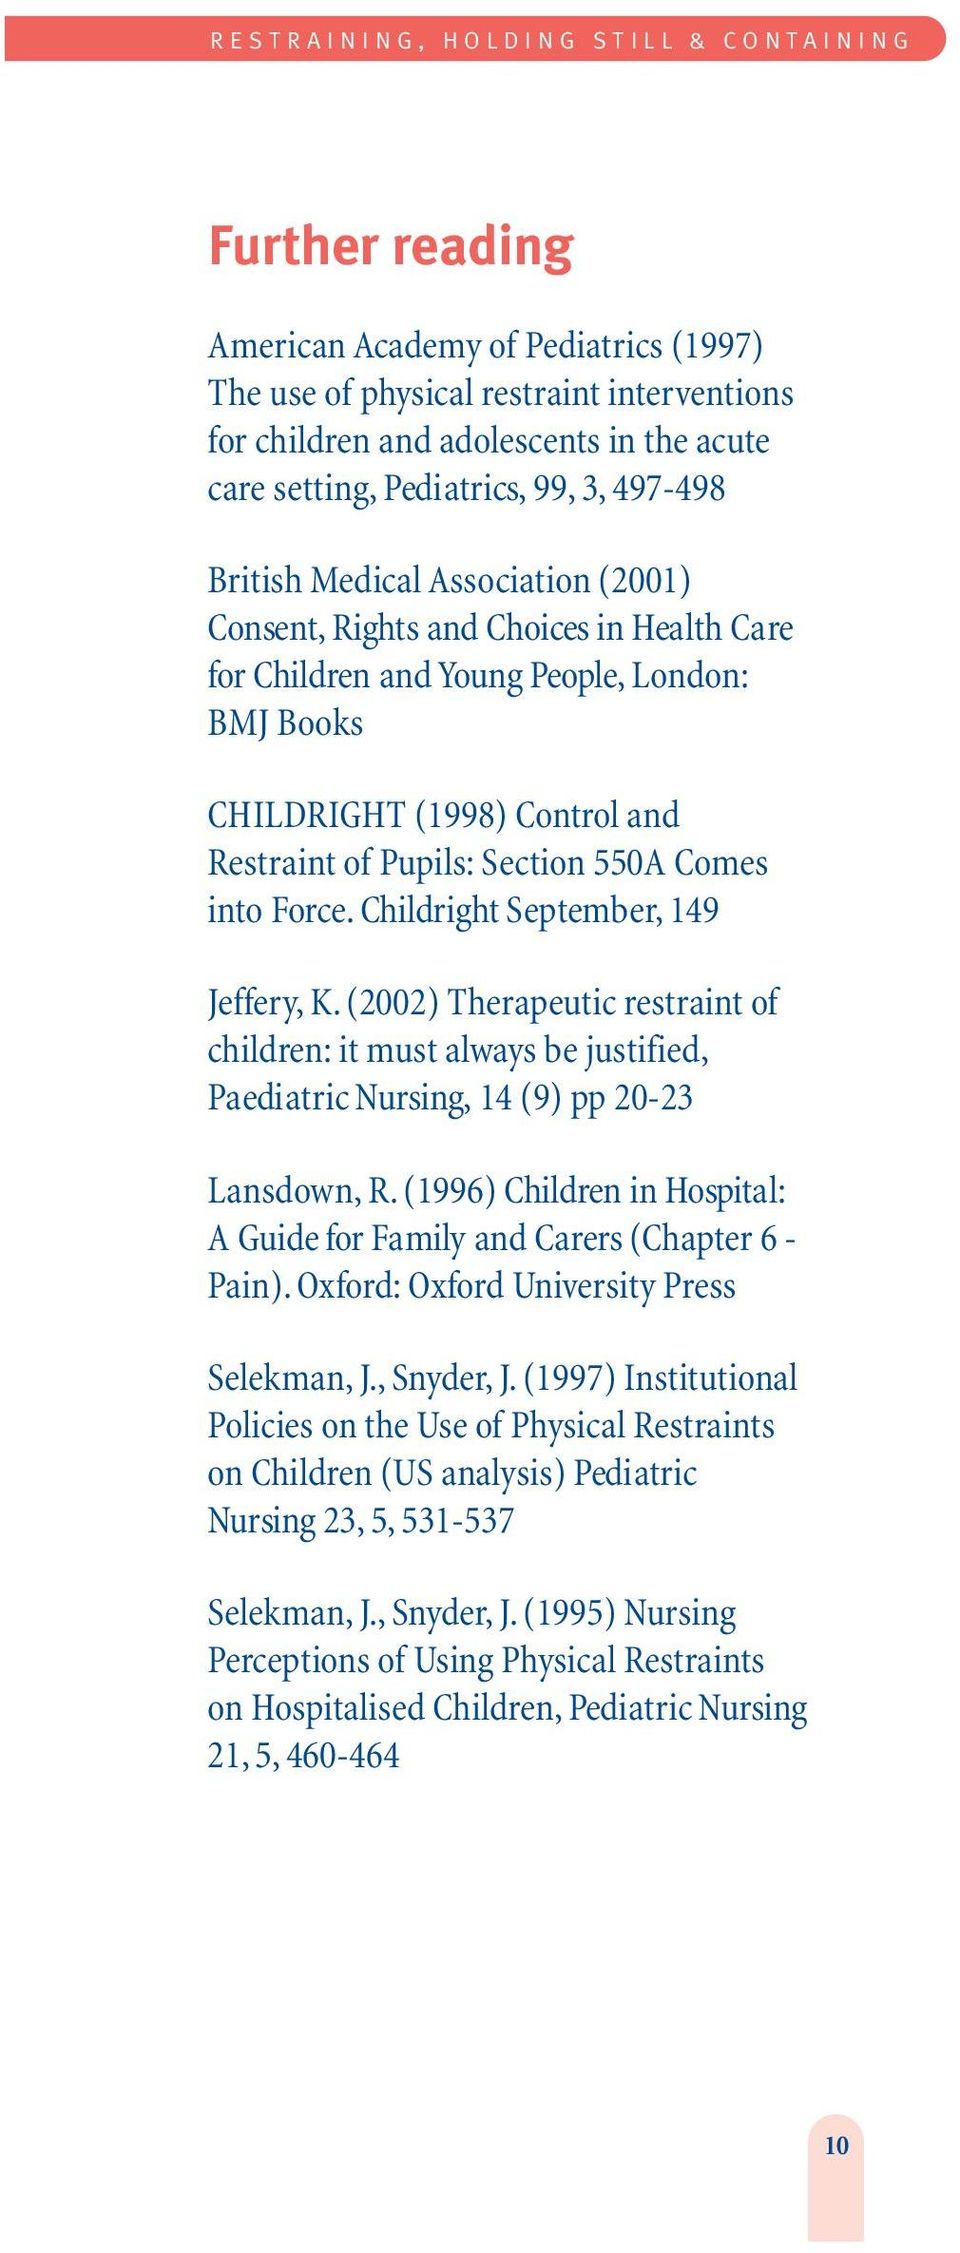 Pupils: Section 550A Comes into Force. Childright September, 149 Jeffery, K. (2002) Therapeutic restraint of children: it must always be justified, Paediatric Nursing, 14 (9) pp 20-23 Lansdown, R.